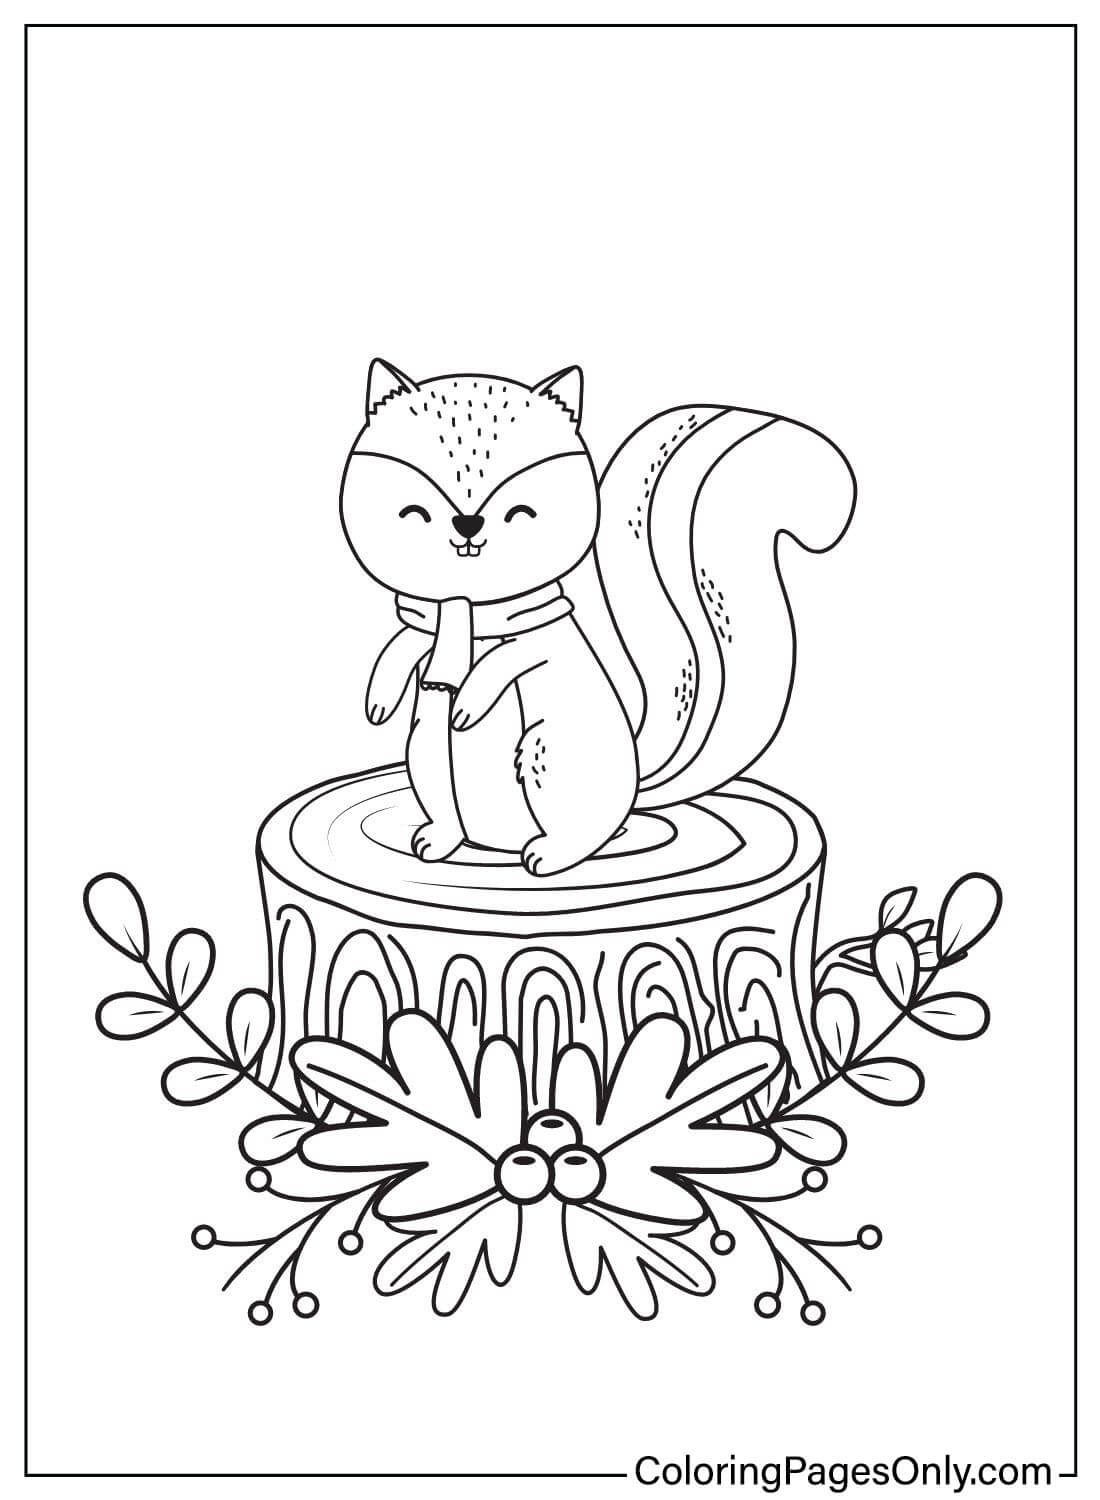 Chipmunk Coloring Page Free from Chipmunk